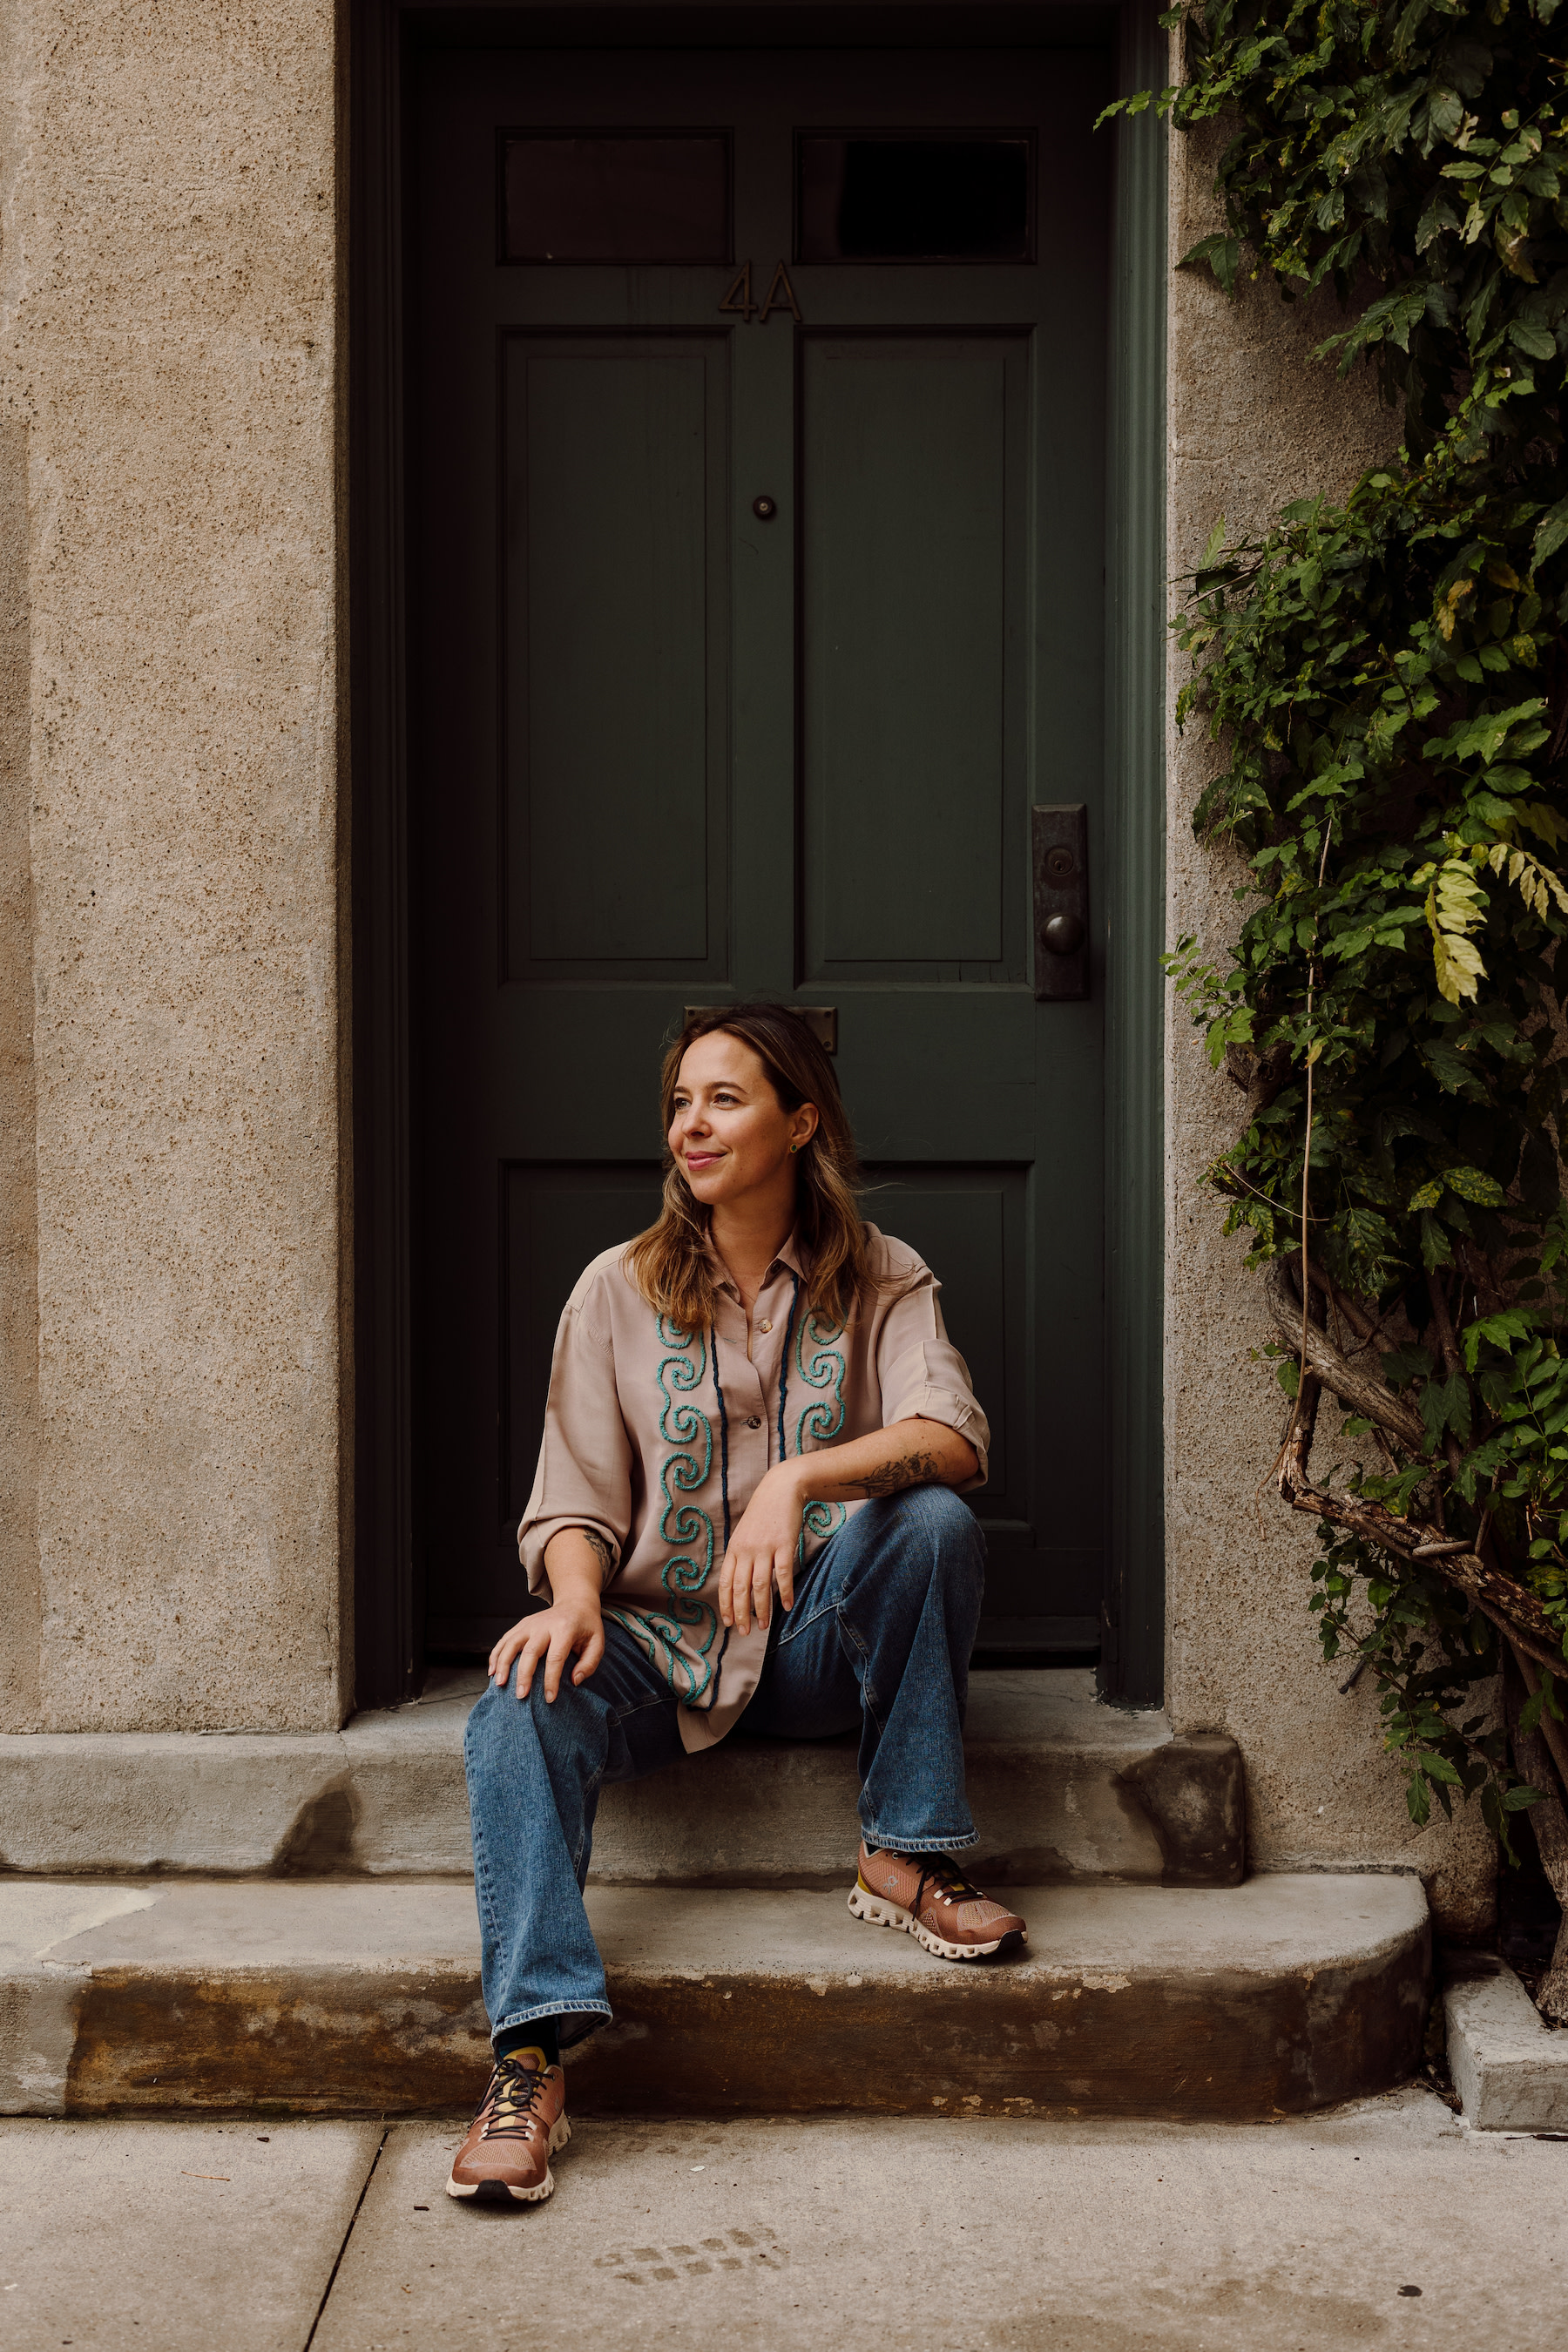 Author Jana sitting and smiling in front of doorstep in a courtyard